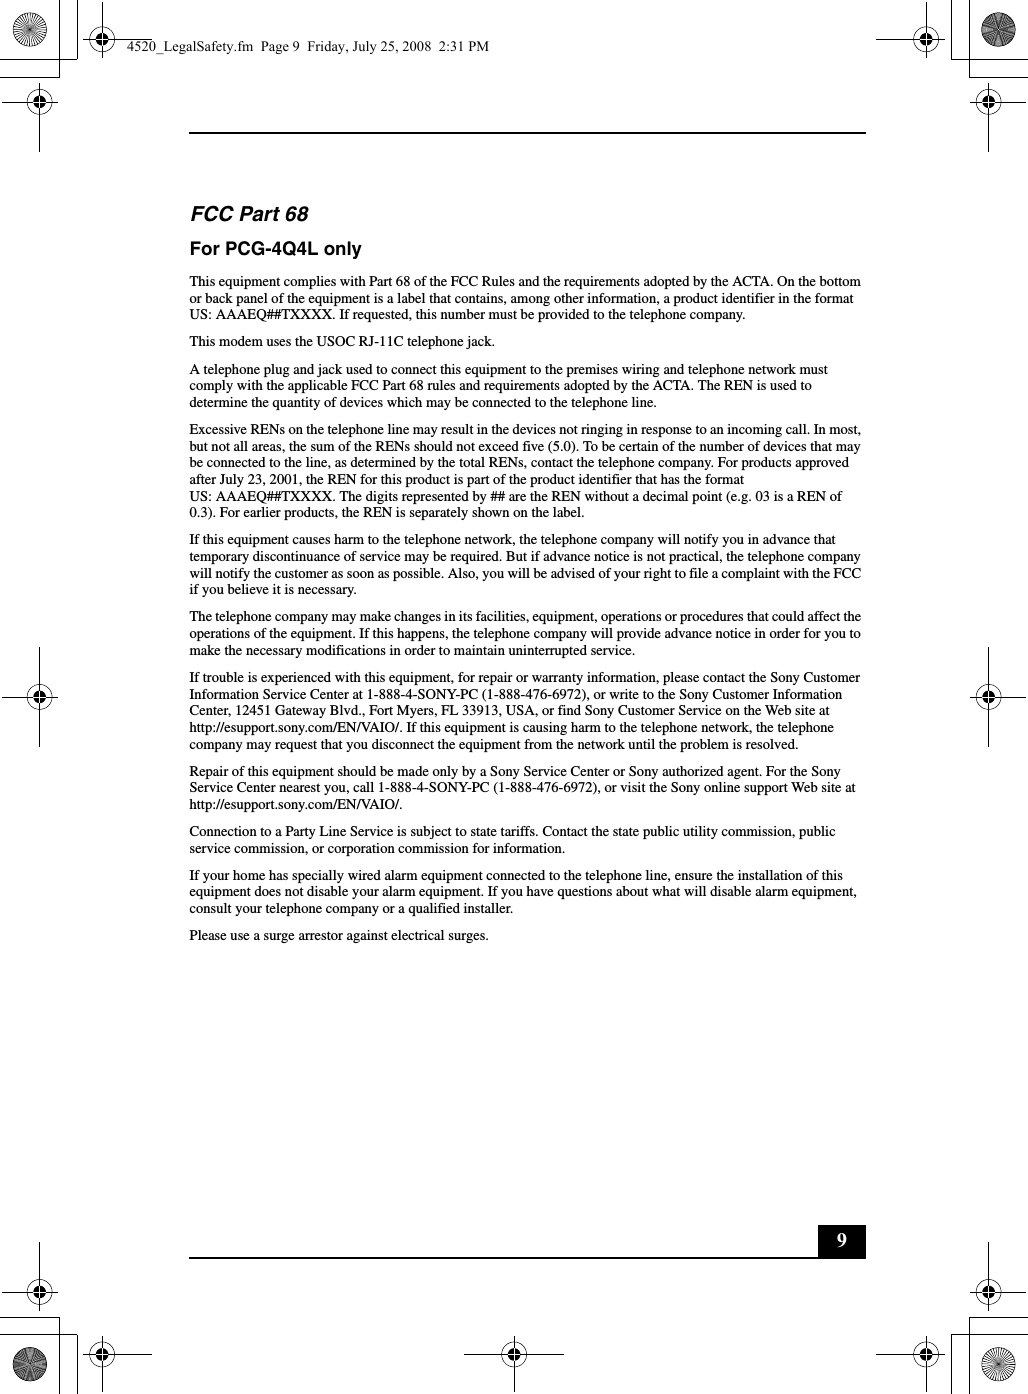 9FCC Part 68 For PCG-4Q4L onlyThis equipment complies with Part 68 of the FCC Rules and the requirements adopted by the ACTA. On the bottom or back panel of the equipment is a label that contains, among other information, a product identifier in the format US: AAAEQ##TXXXX. If requested, this number must be provided to the telephone company.This modem uses the USOC RJ-11C telephone jack.A telephone plug and jack used to connect this equipment to the premises wiring and telephone network must comply with the applicable FCC Part 68 rules and requirements adopted by the ACTA. The REN is used to determine the quantity of devices which may be connected to the telephone line.Excessive RENs on the telephone line may result in the devices not ringing in response to an incoming call. In most, but not all areas, the sum of the RENs should not exceed five (5.0). To be certain of the number of devices that may be connected to the line, as determined by the total RENs, contact the telephone company. For products approved after July 23, 2001, the REN for this product is part of the product identifier that has the format US: AAAEQ##TXXXX. The digits represented by ## are the REN without a decimal point (e.g. 03 is a REN of 0.3). For earlier products, the REN is separately shown on the label.If this equipment causes harm to the telephone network, the telephone company will notify you in advance that temporary discontinuance of service may be required. But if advance notice is not practical, the telephone company will notify the customer as soon as possible. Also, you will be advised of your right to file a complaint with the FCC if you believe it is necessary.The telephone company may make changes in its facilities, equipment, operations or procedures that could affect the operations of the equipment. If this happens, the telephone company will provide advance notice in order for you to make the necessary modifications in order to maintain uninterrupted service.If trouble is experienced with this equipment, for repair or warranty information, please contact the Sony Customer Information Service Center at 1-888-4-SONY-PC (1-888-476-6972), or write to the Sony Customer Information Center, 12451 Gateway Blvd., Fort Myers, FL 33913, USA, or find Sony Customer Service on the Web site at http://esupport.sony.com/EN/VAIO/. If this equipment is causing harm to the telephone network, the telephone company may request that you disconnect the equipment from the network until the problem is resolved.Repair of this equipment should be made only by a Sony Service Center or Sony authorized agent. For the Sony Service Center nearest you, call 1-888-4-SONY-PC (1-888-476-6972), or visit the Sony online support Web site at http://esupport.sony.com/EN/VAIO/.Connection to a Party Line Service is subject to state tariffs. Contact the state public utility commission, public service commission, or corporation commission for information.If your home has specially wired alarm equipment connected to the telephone line, ensure the installation of this equipment does not disable your alarm equipment. If you have questions about what will disable alarm equipment, consult your telephone company or a qualified installer.Please use a surge arrestor against electrical surges.4520_LegalSafety.fm  Page 9  Friday, July 25, 2008  2:31 PM